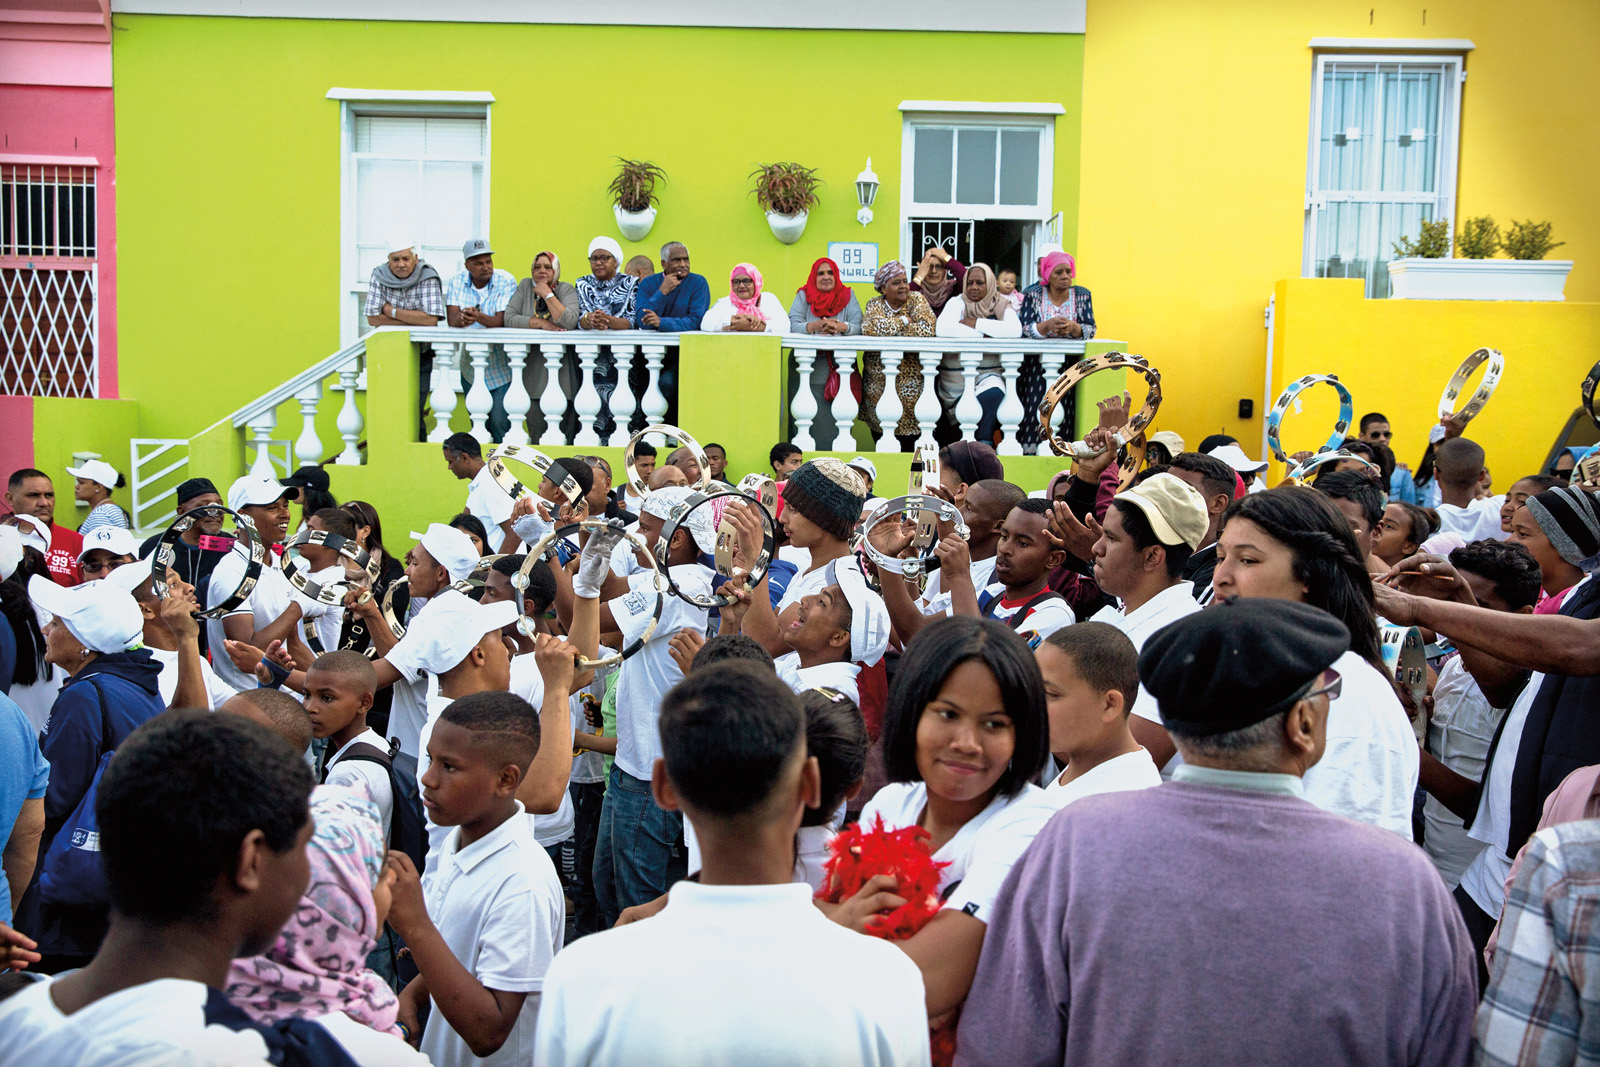 Generations of Bo-Kaap residents enjoy music and dance during the annual Heritage Festival 5KM Family Fun Walk, which parades through the neighborhood on September 24, Heritage Day.